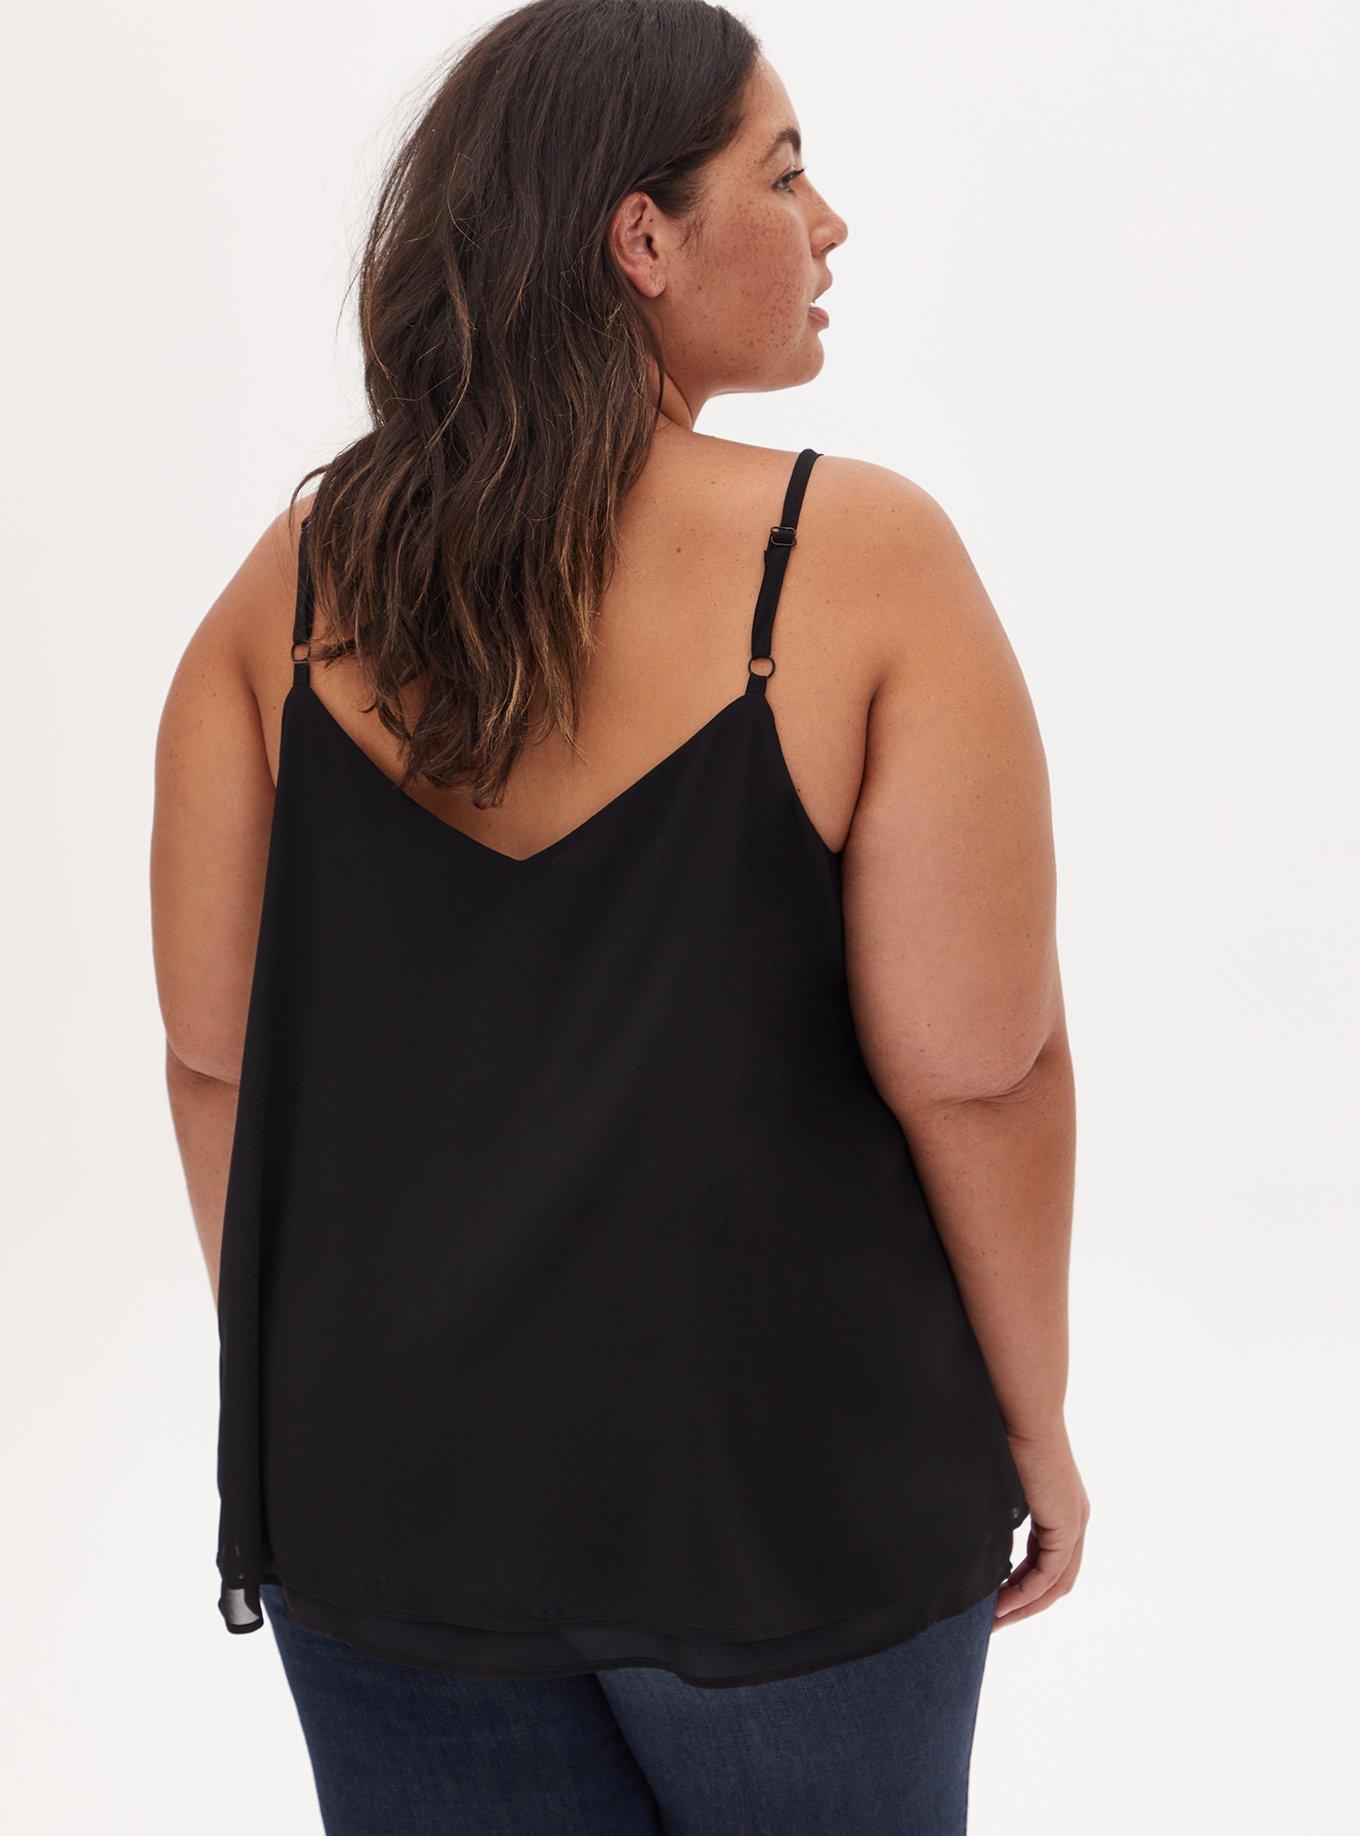 Torrid Black Double Layer V-Neck Cami with Tags